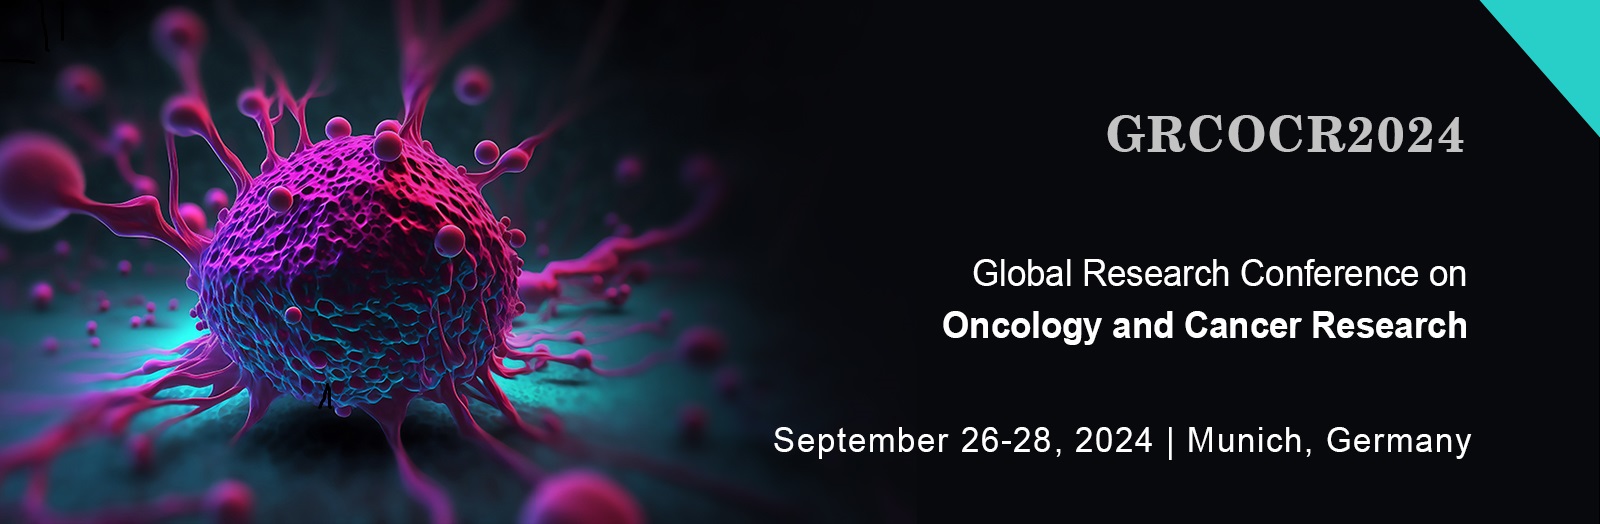 Global Research Conference on Oncology and Cancer Research, Munich, Bayern, Germany